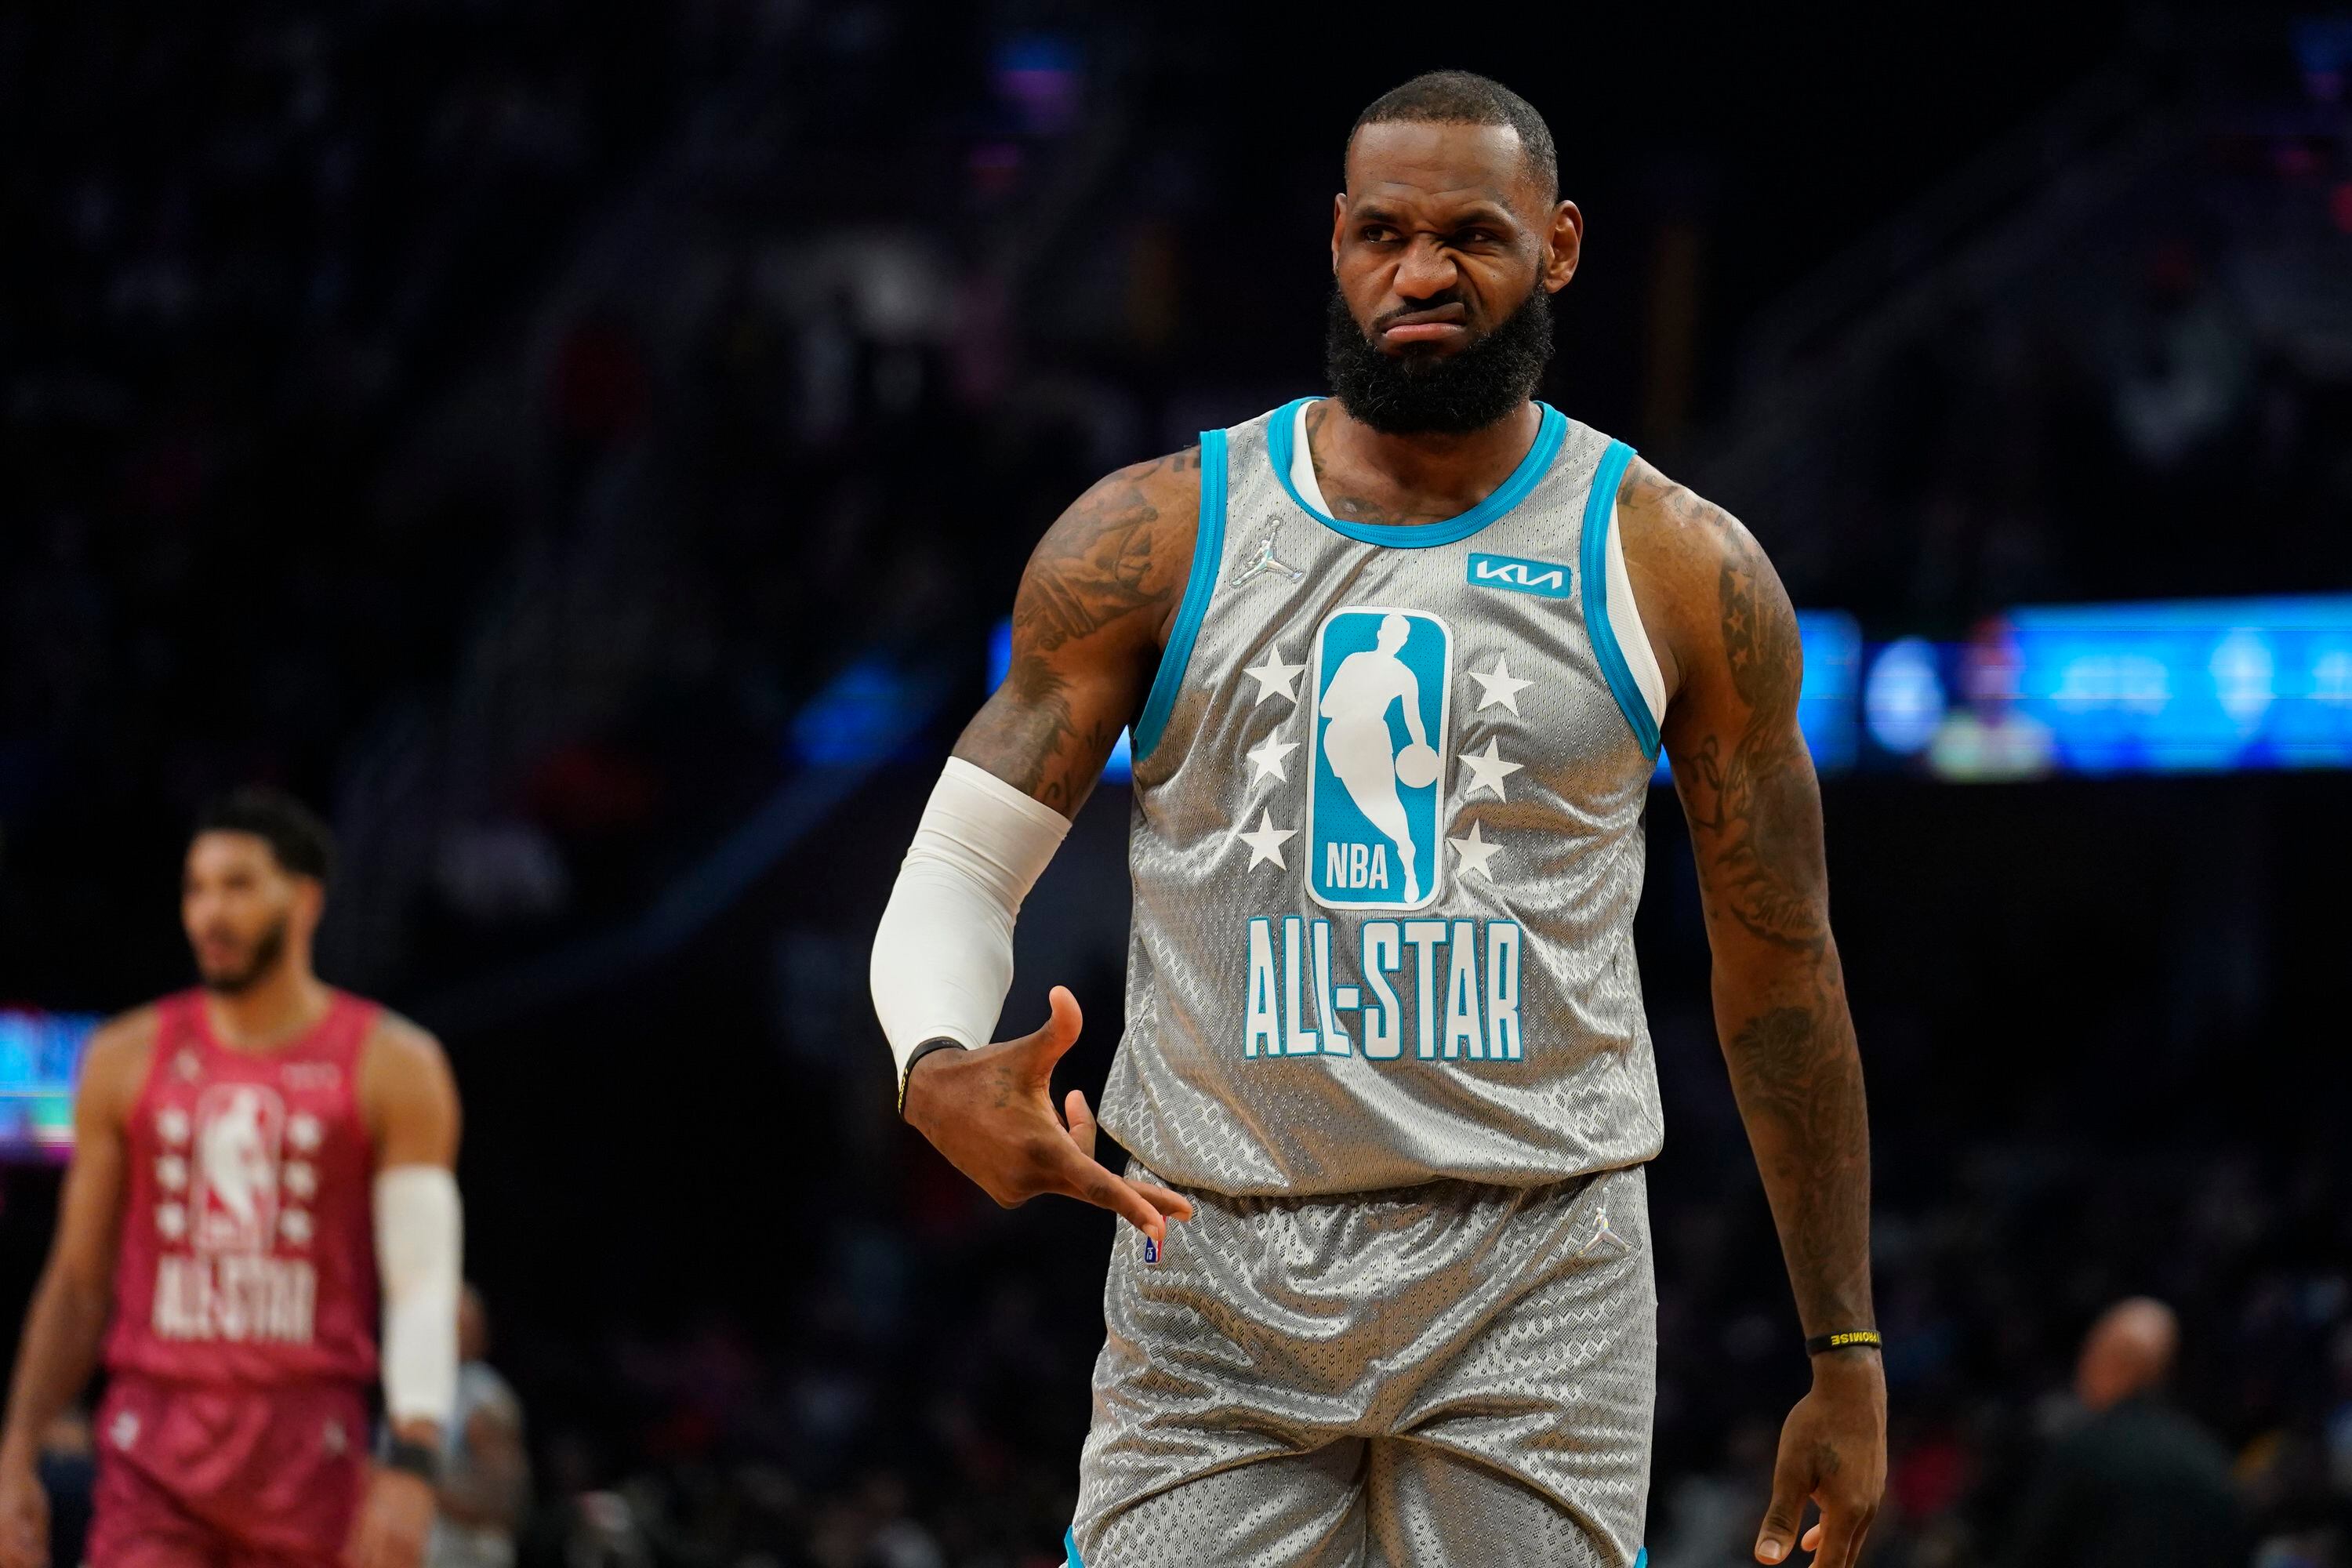 NBA news 2023, top selling NBA jerseys: The superstars raking in the cash  for basketball; LeBron James tops jersey sales for season, Steph Curry  second